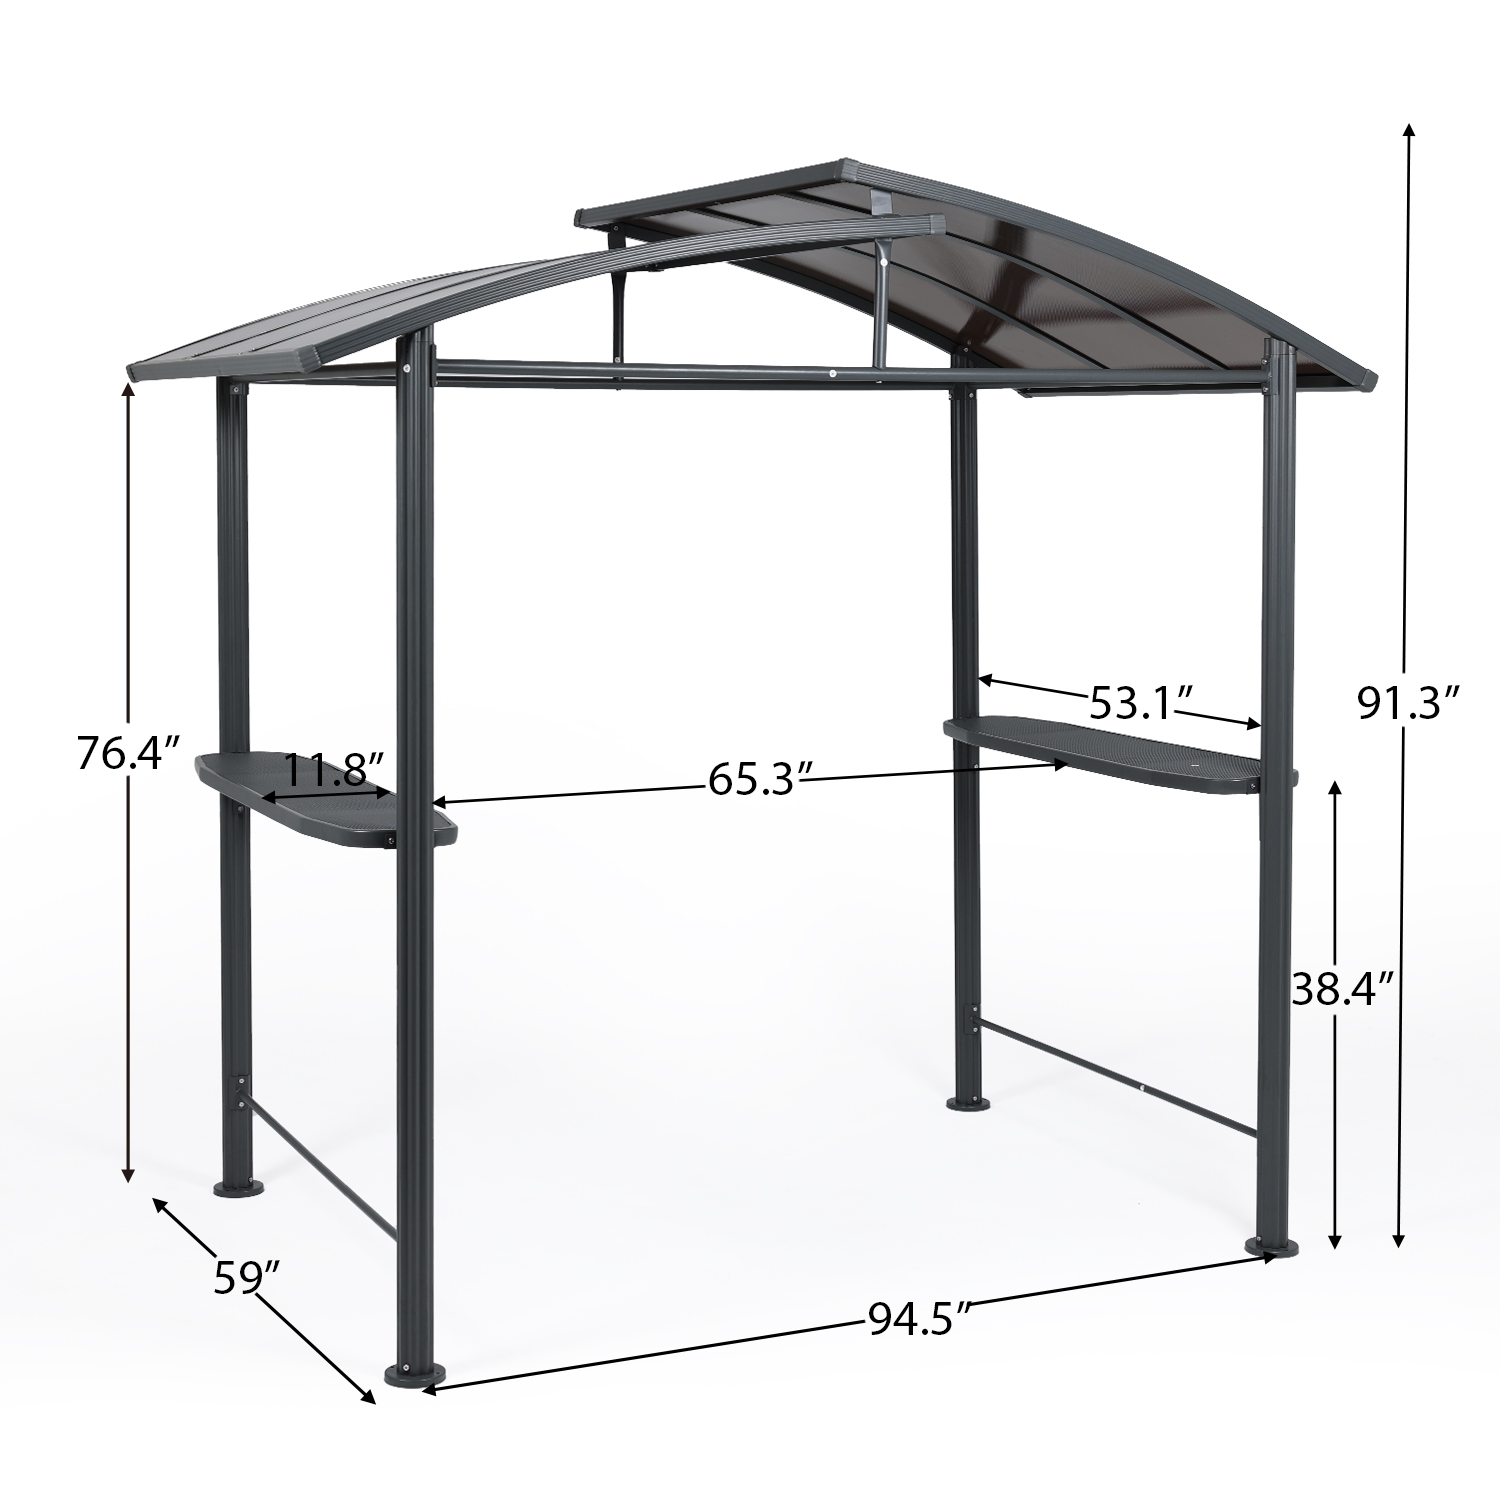 Aoodor 8 x 5 ft. BBQ Grill Gazebo Shelter, Gray Steel Frame with Side Shelves,  for Outdoor, Patio, Backyard - image 3 of 7